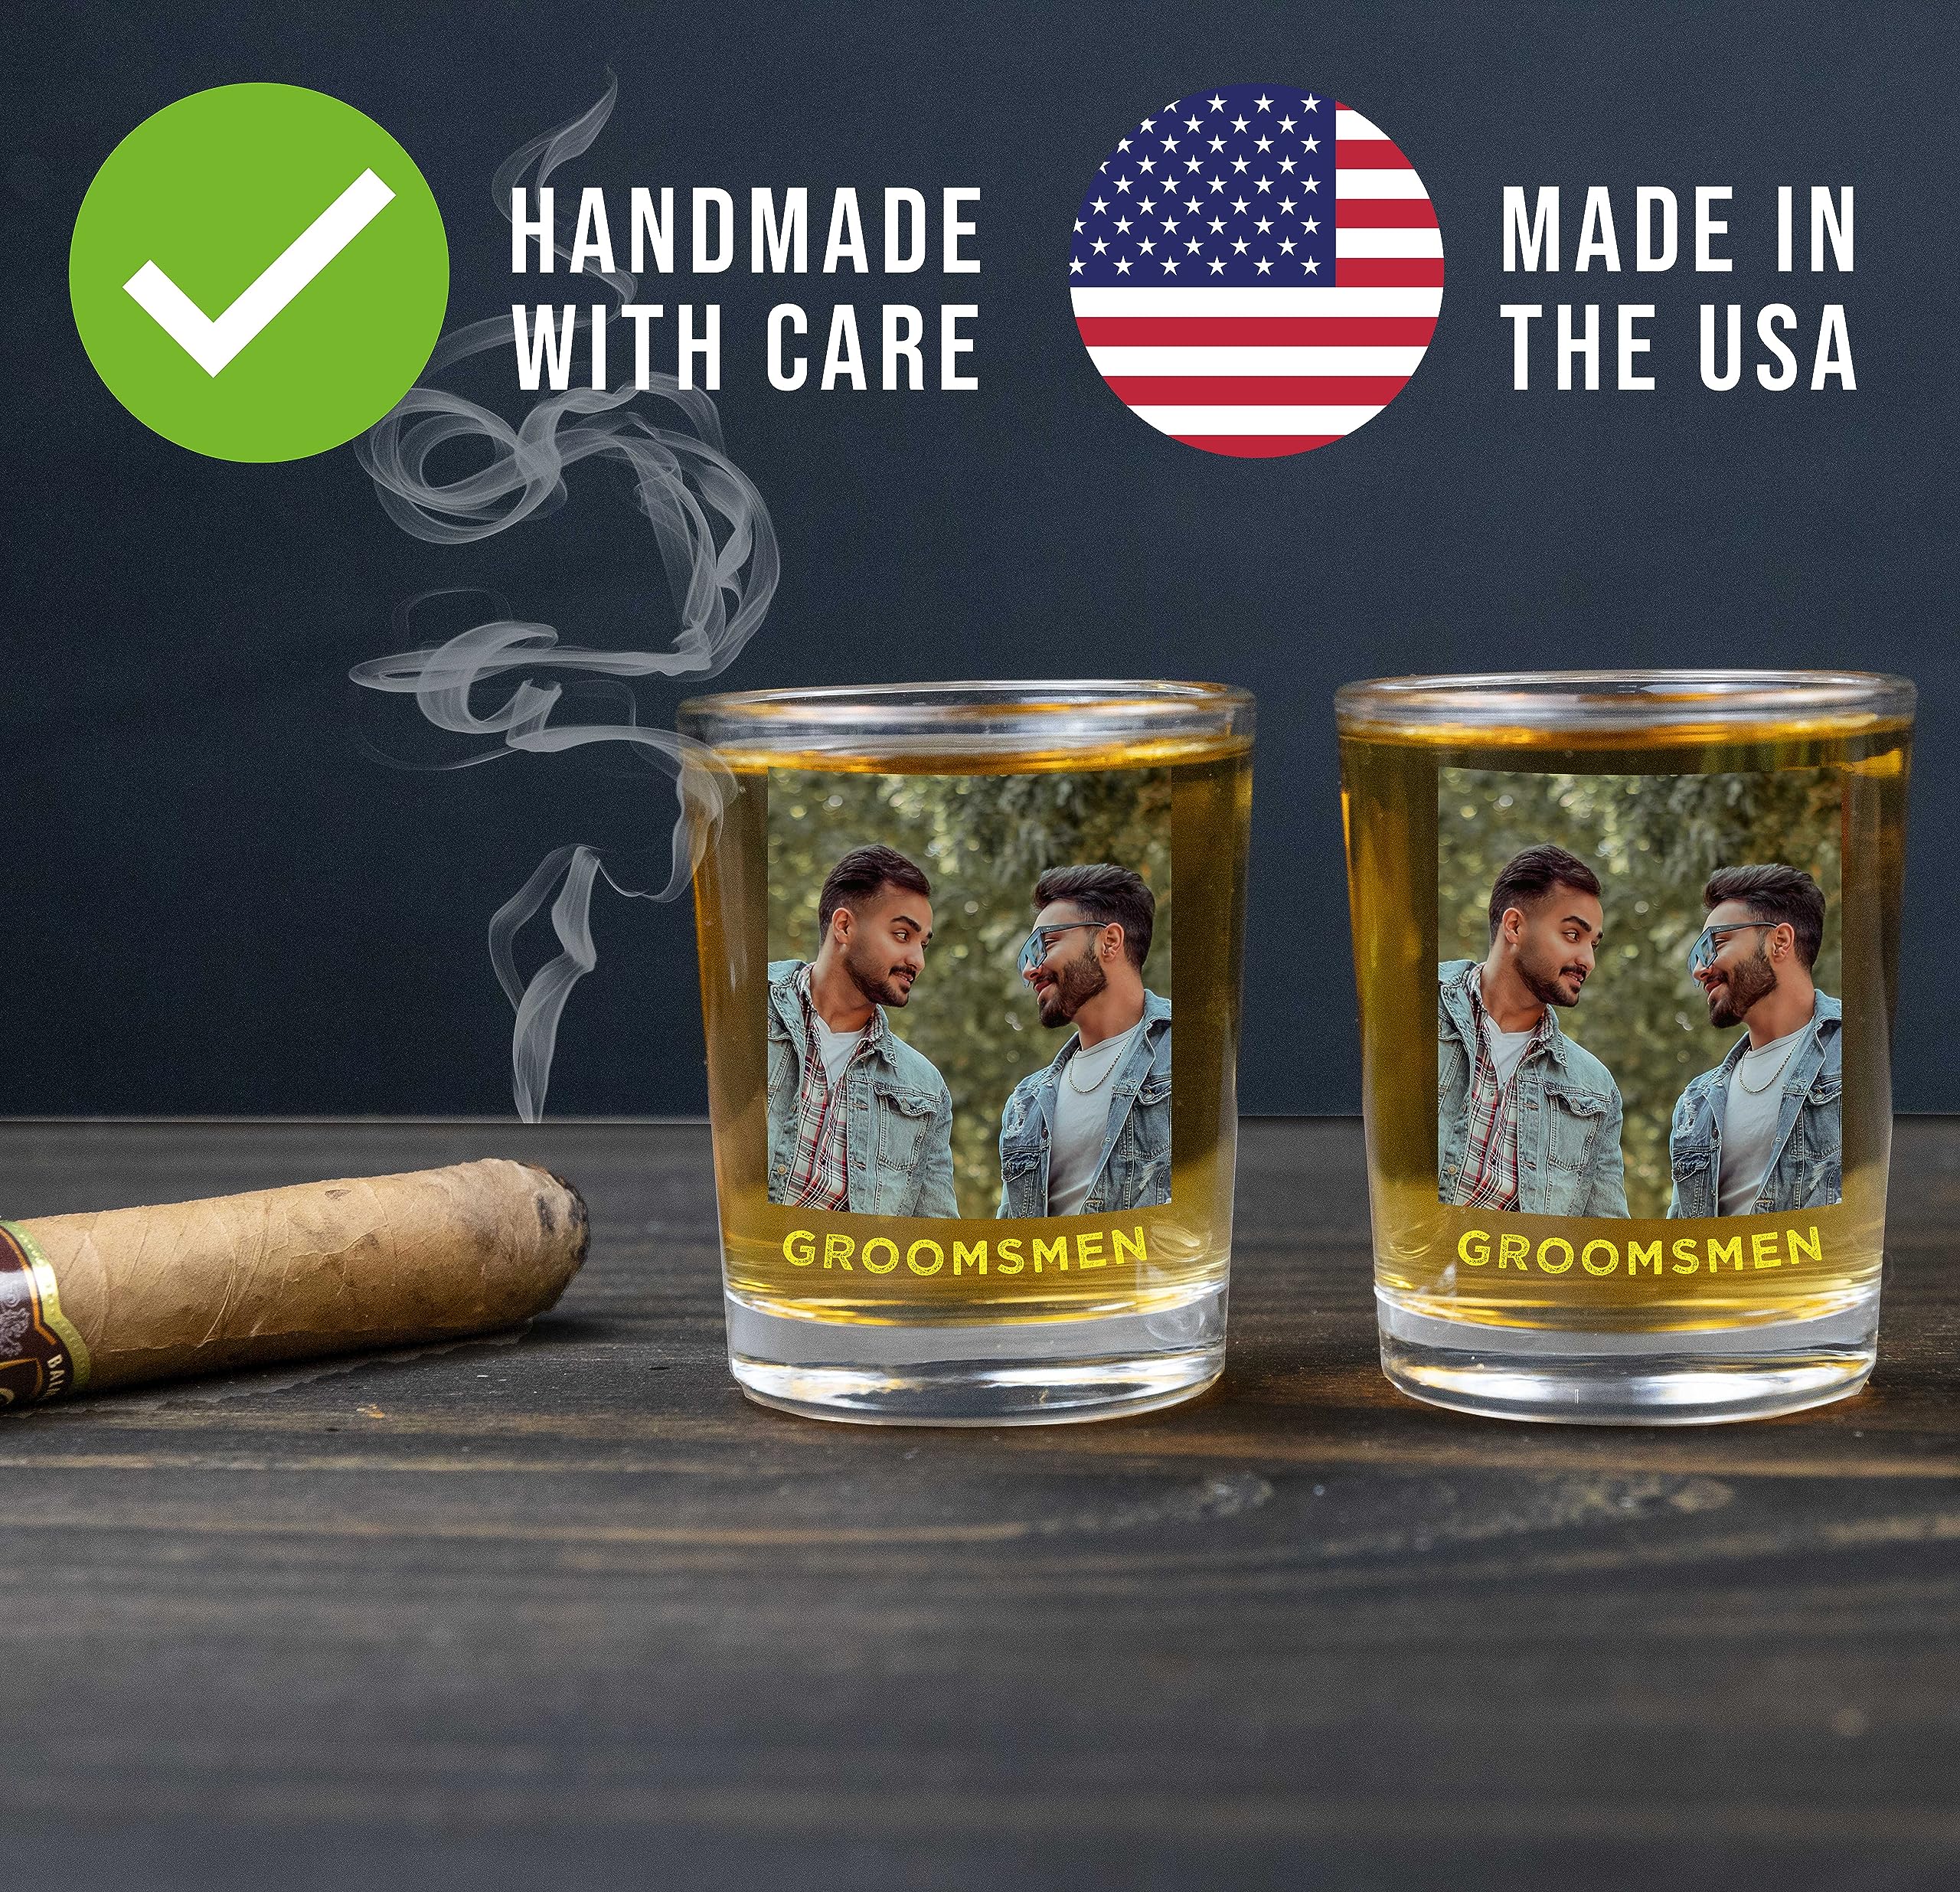 2pk Personalized Printed Photo 2.5oz Shot Glasses, Gifts for Dads and Moms, custom image or pictures – anniversaries, party favors, bachelor or bachelorette party, 21st birthday shot glass